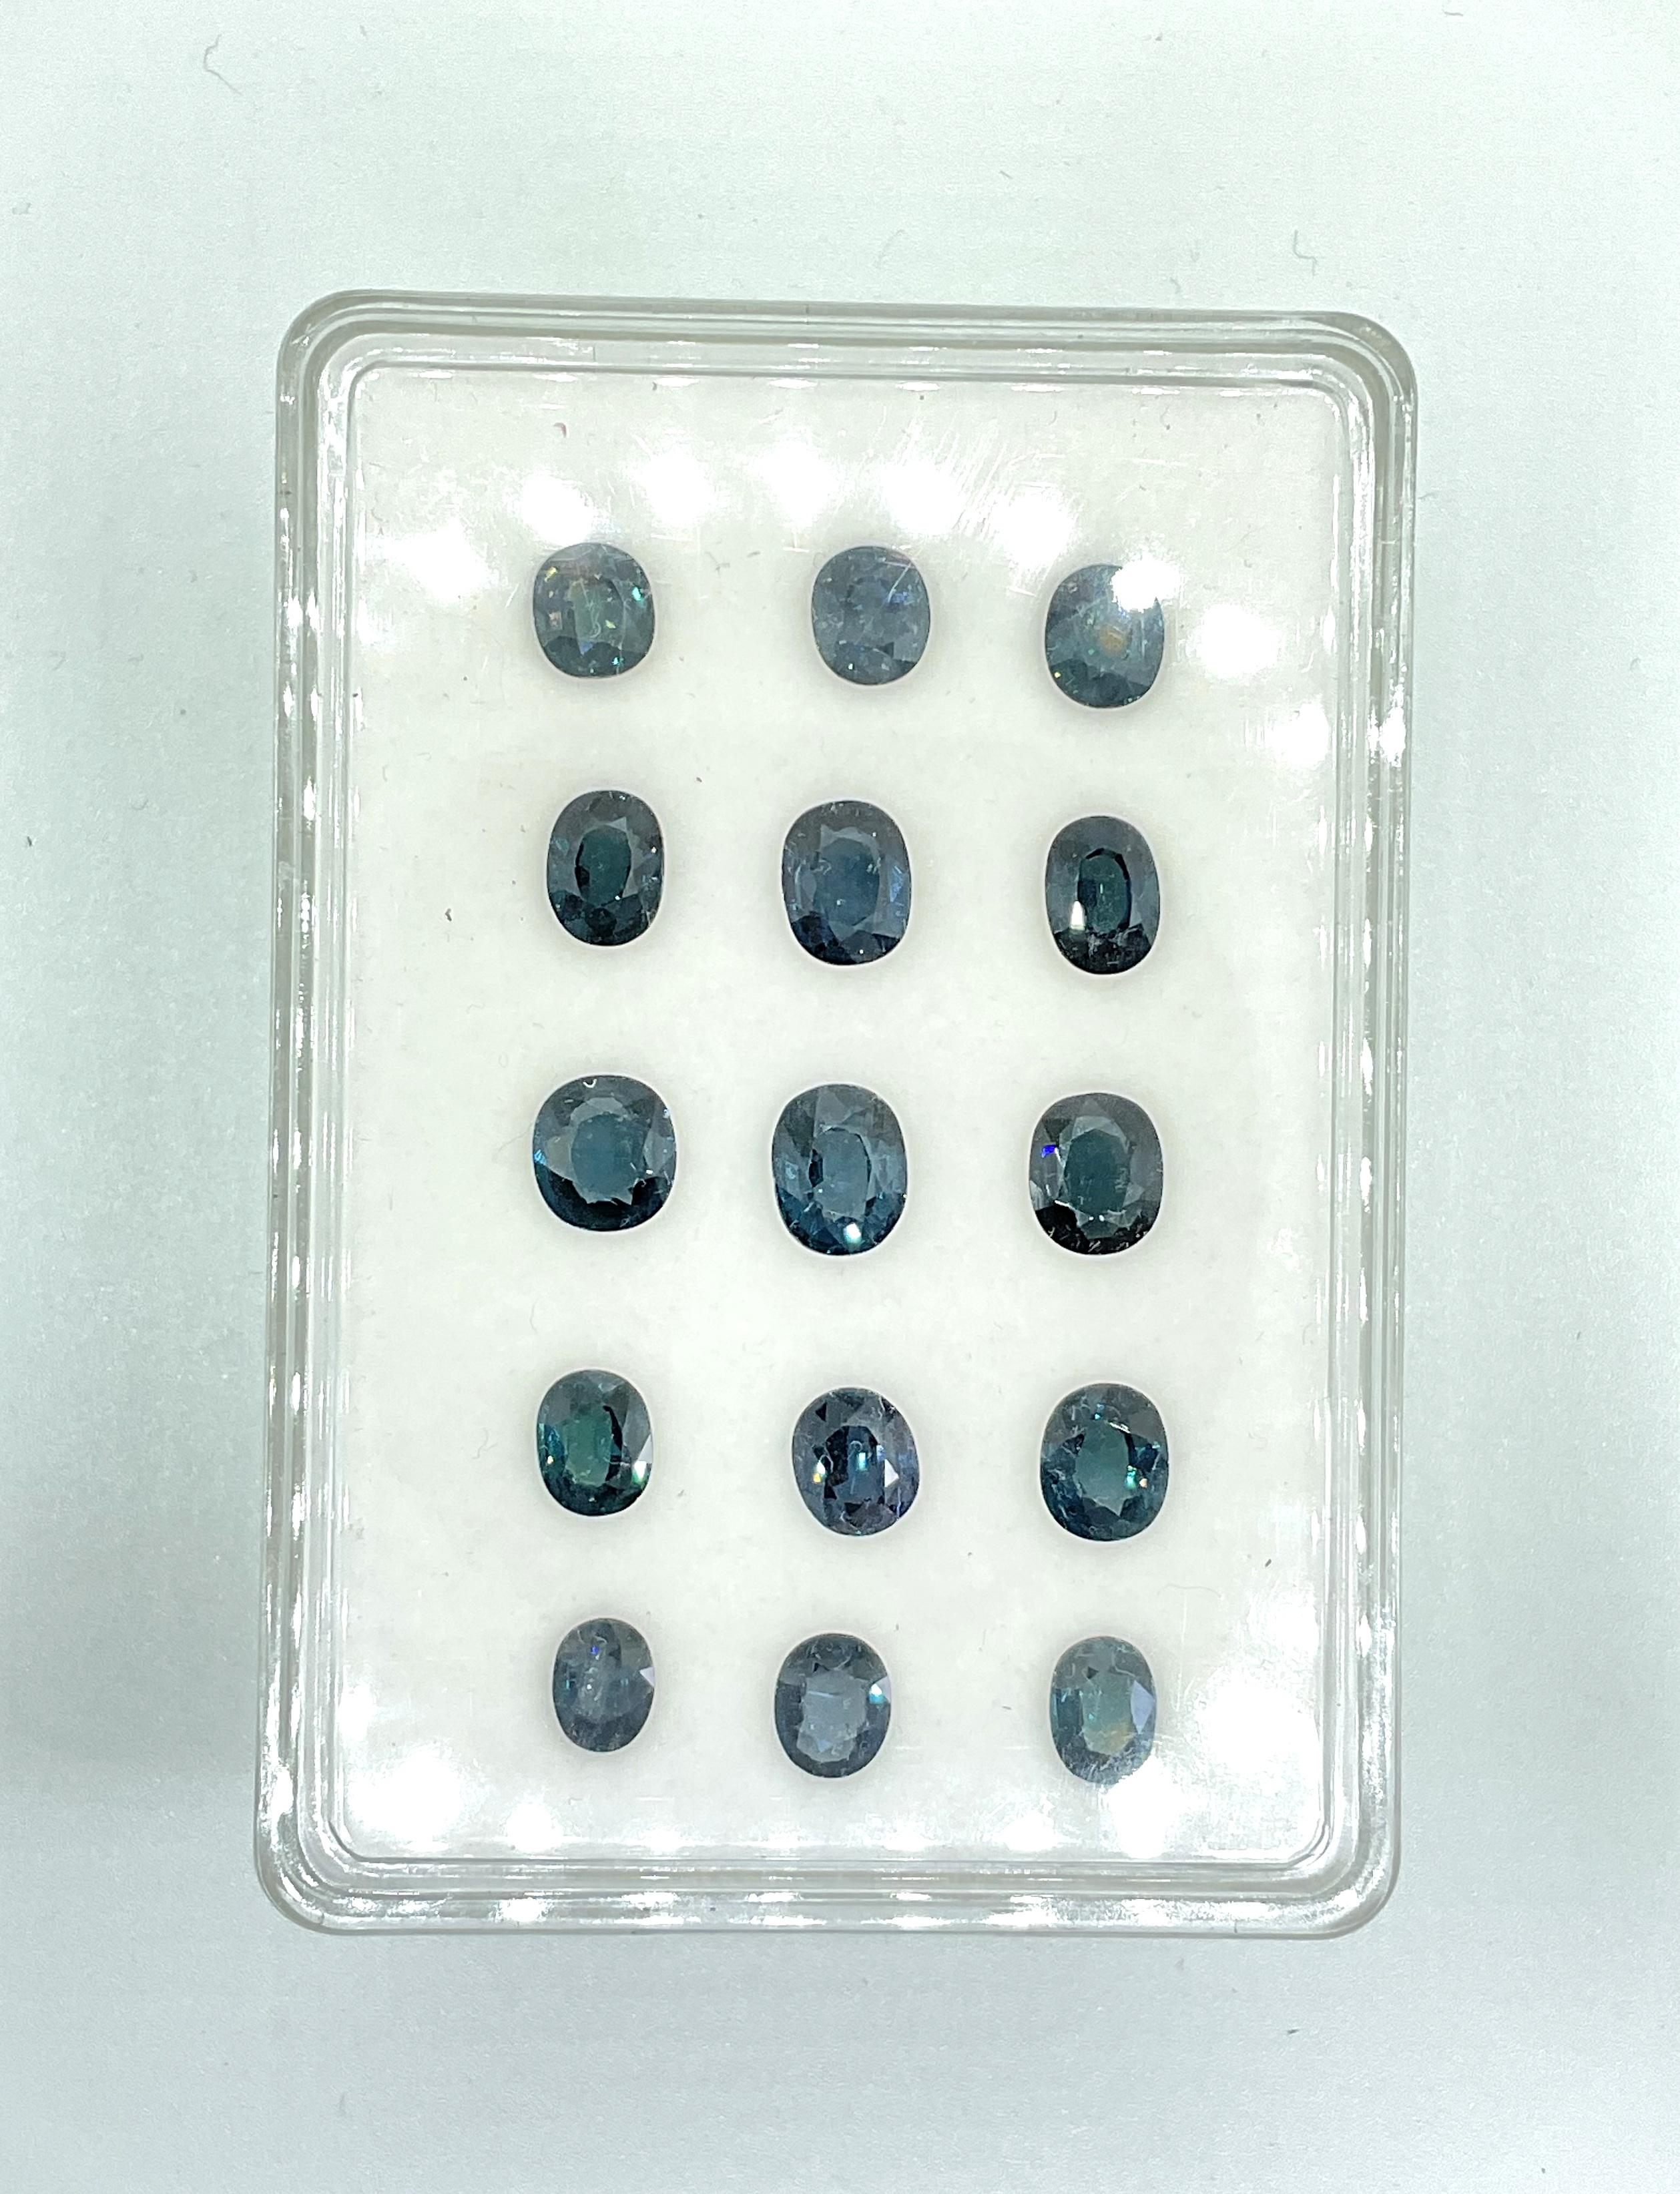 24.30 Carat Blue Spinel Tanzania Oval Faceted Natural Cut stone Fine Jewelry Gem

Weight - 24.30 Carats
Size - 5x7 To 6x8 mm
Shape - Oval
Quantity - 15 Piece